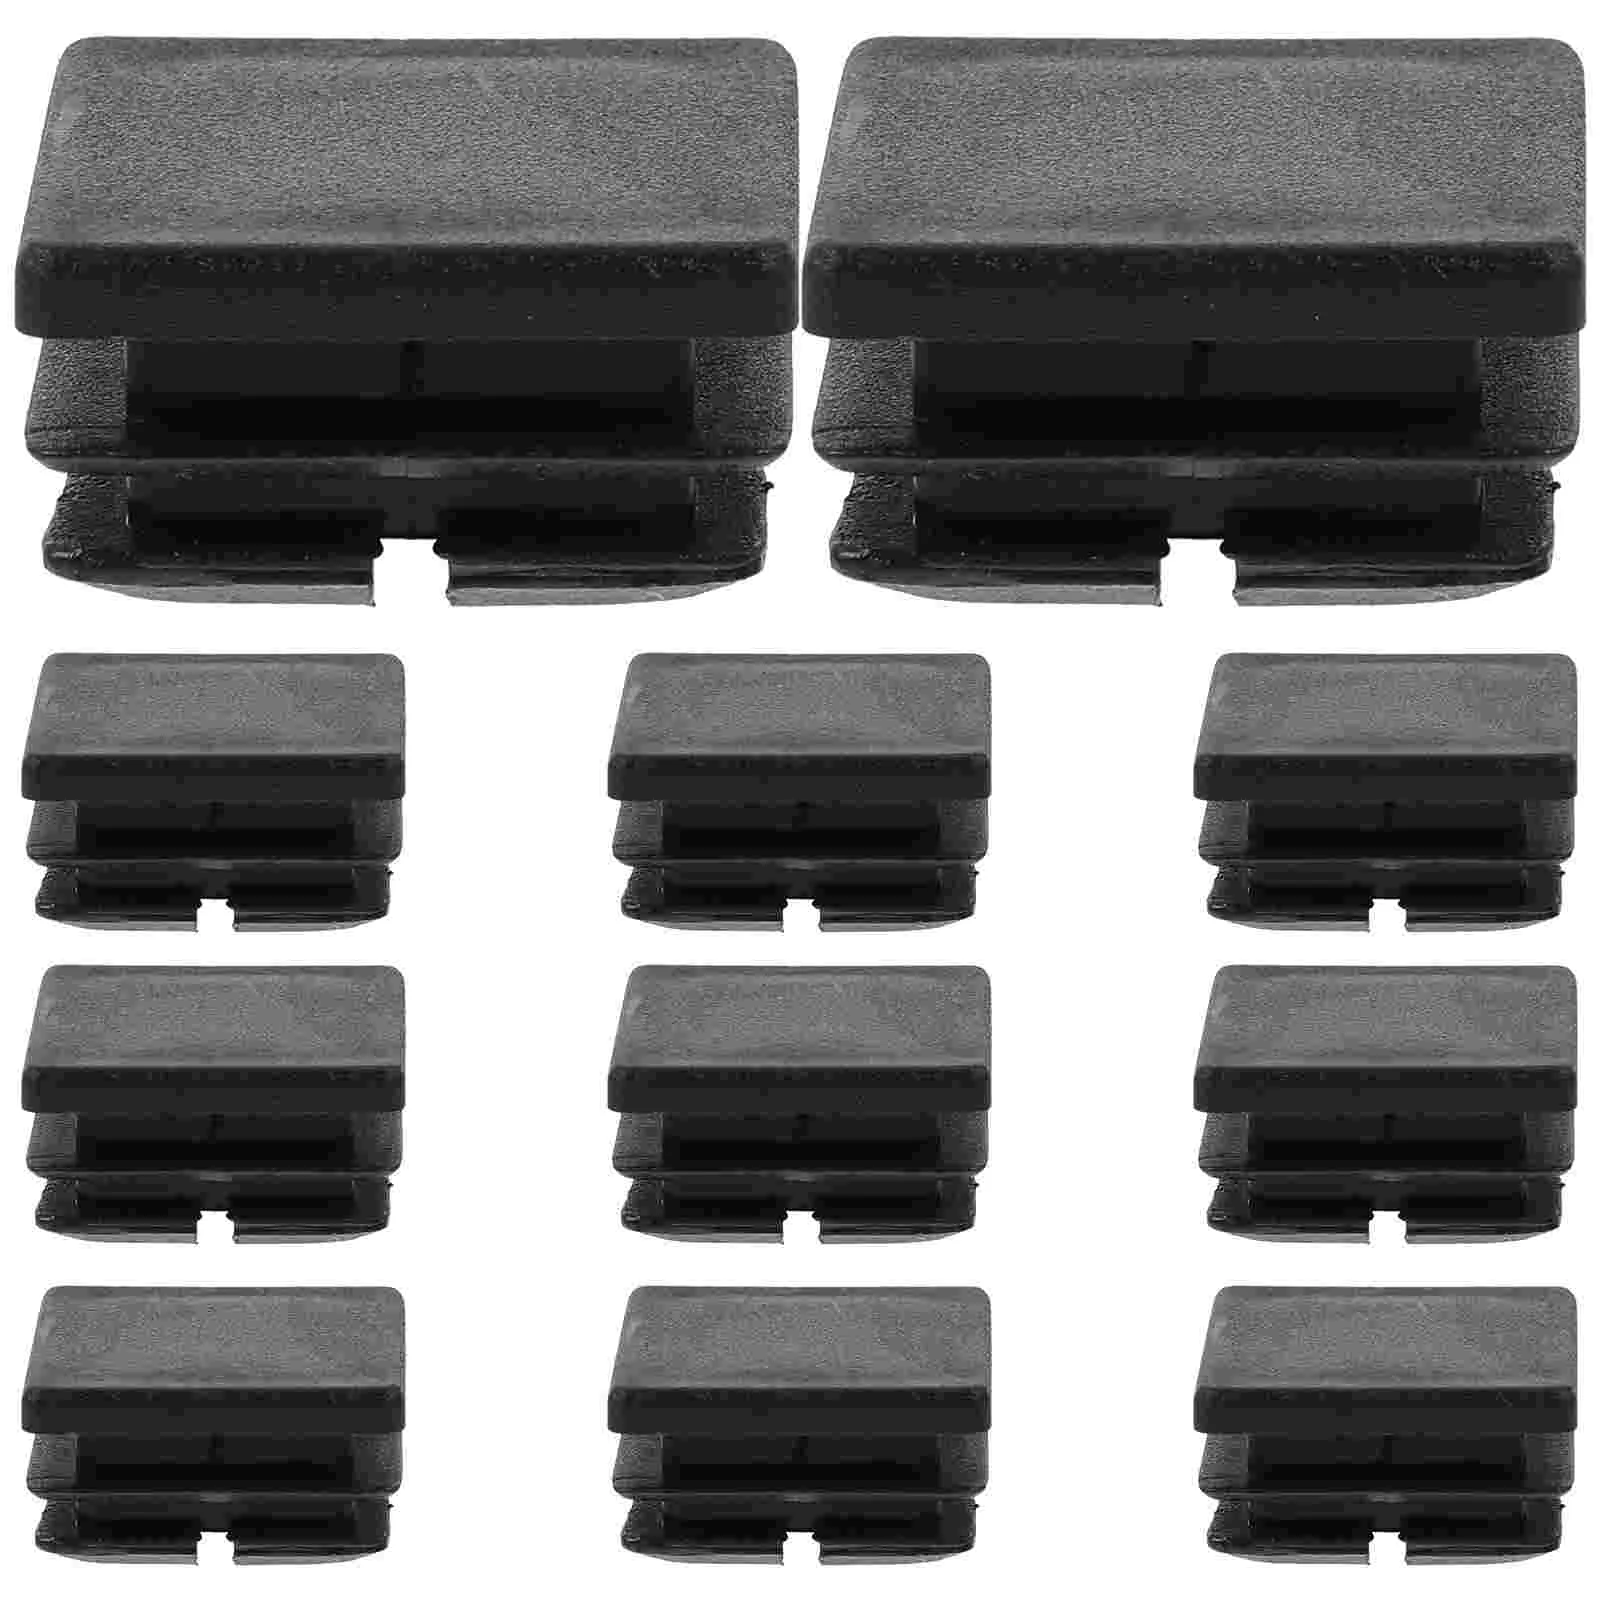 

12pcs Plastic End Caps for Tube Furniture Protector Chair Leg Insert Durable and Versatile Caps for Various Applications